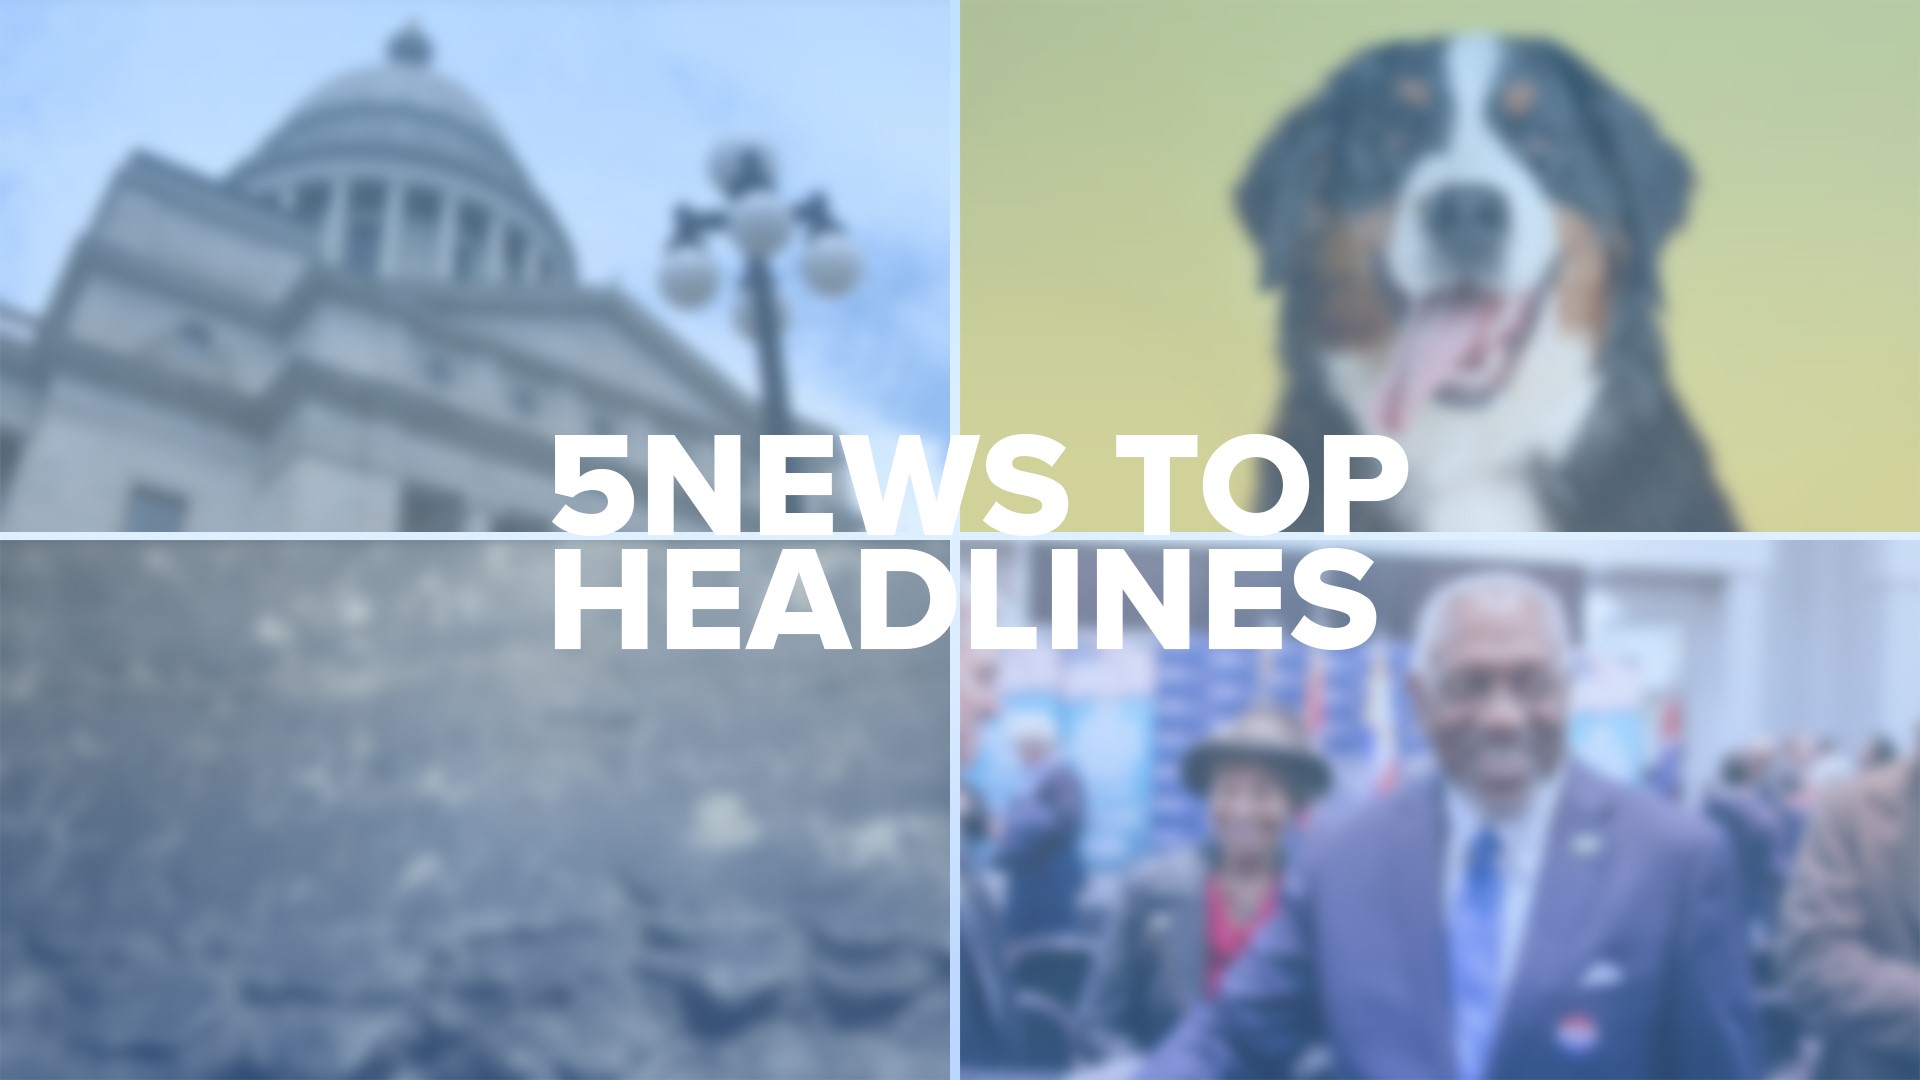 Take a look at some of the top headlines you may have missed this week for local news across our area!